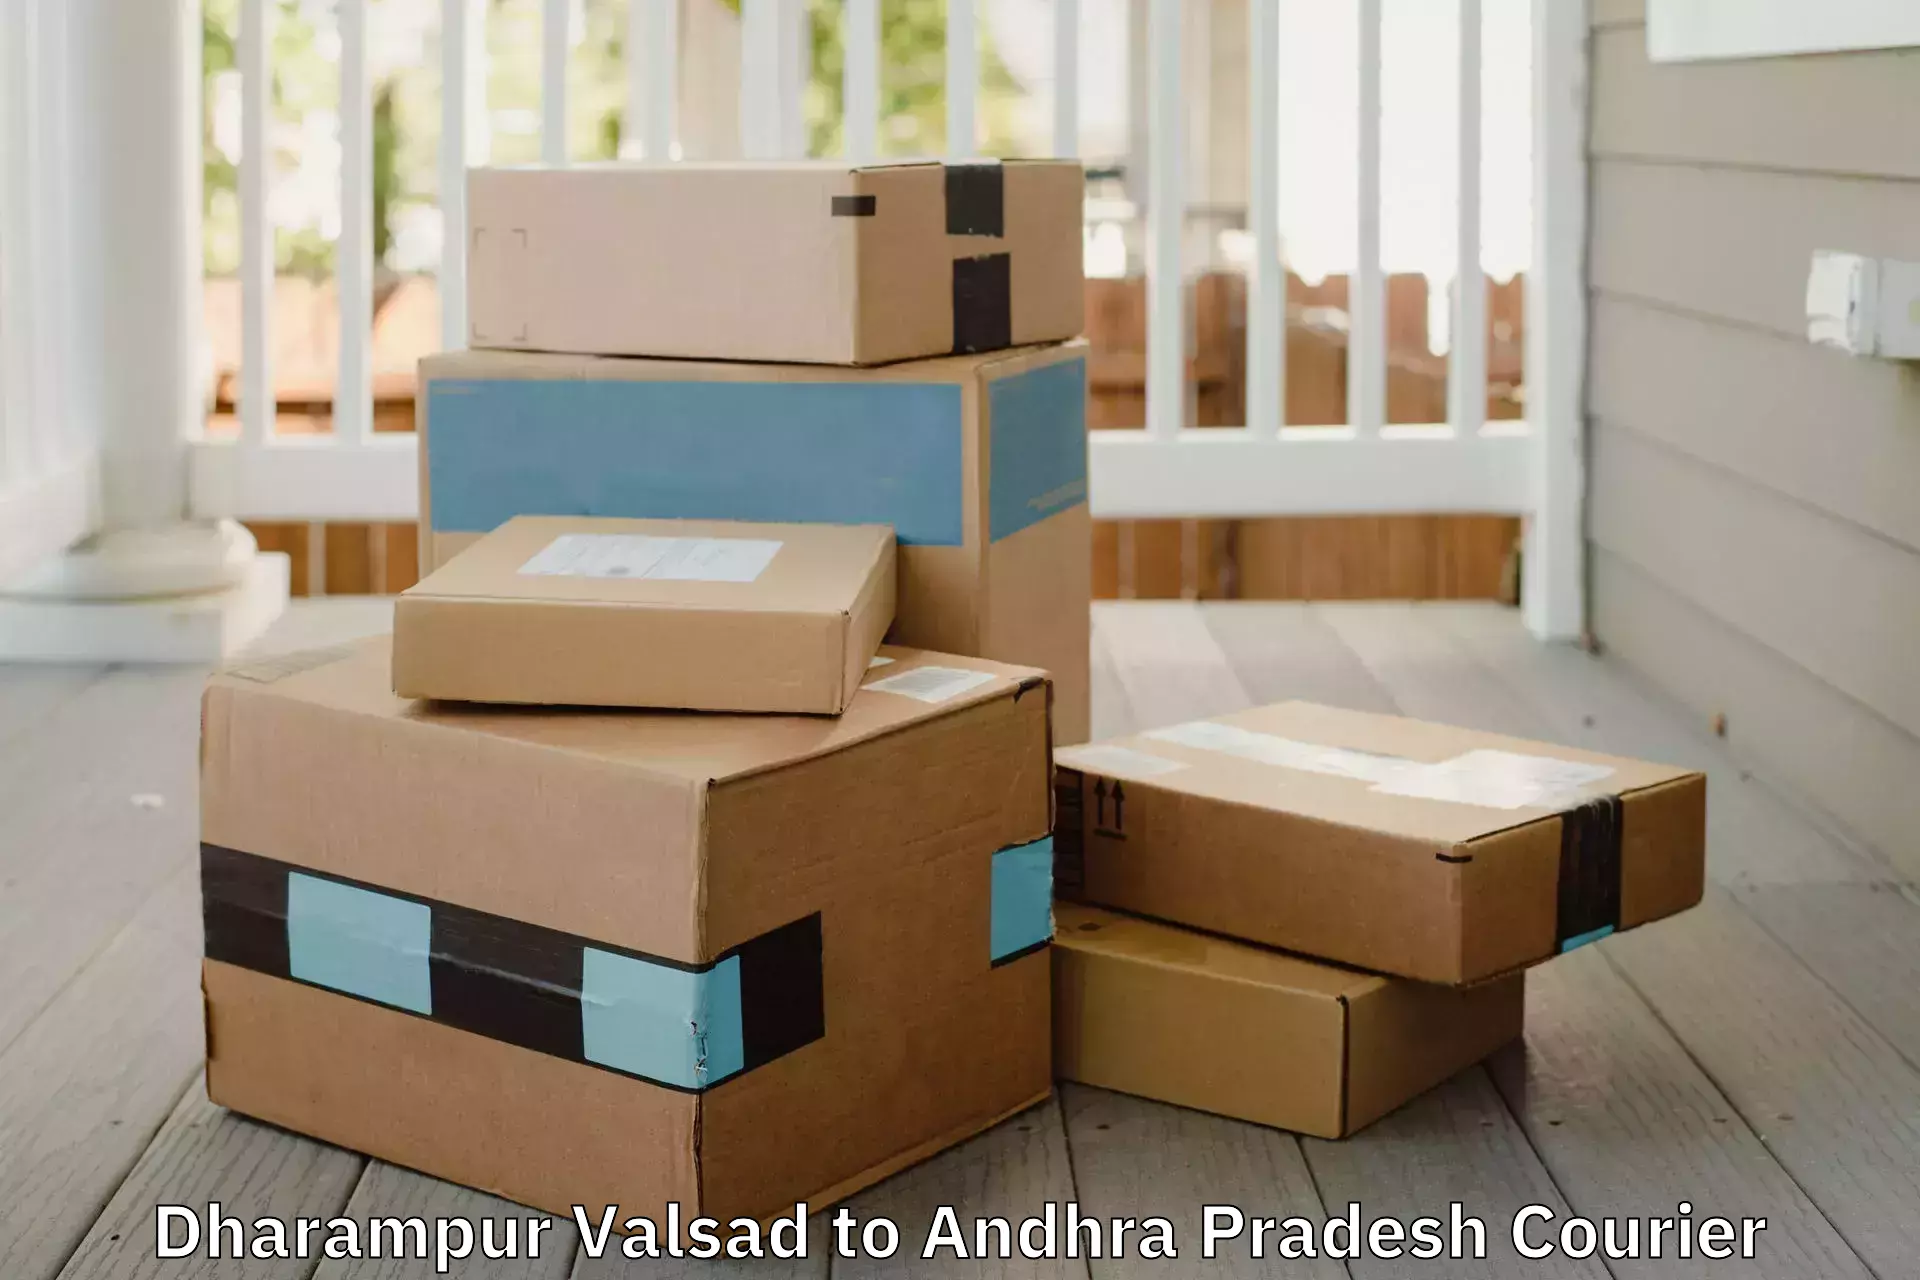 Nationwide household relocation Dharampur Valsad to Visakhapatnam Port